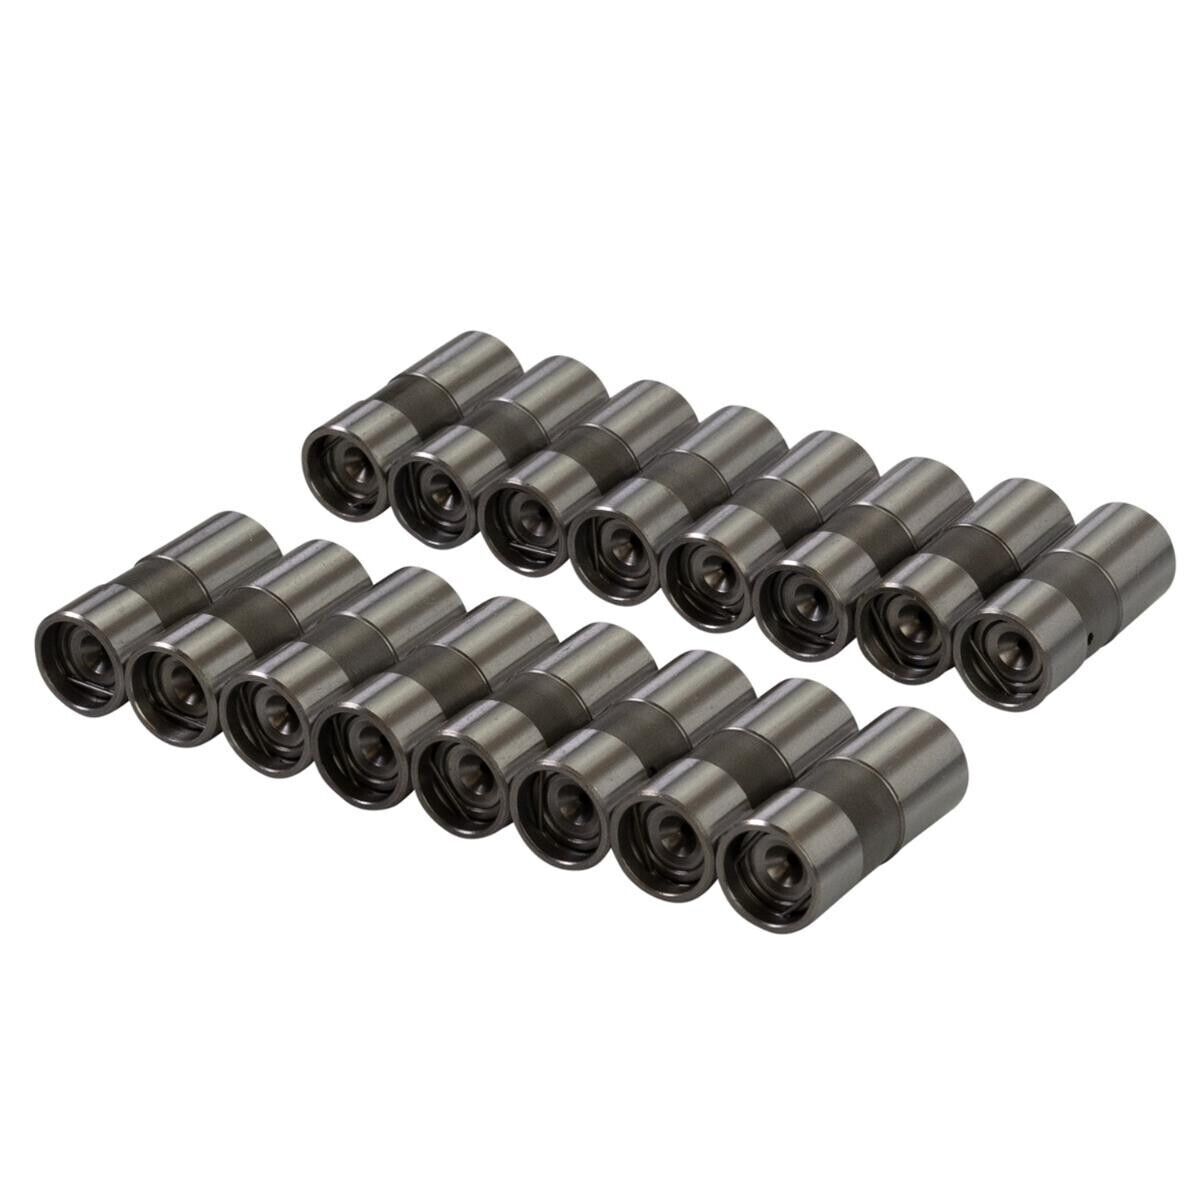 COMP Cams High Energy Hydraulic Lifters DLC Coated Chev 350 454 # CC812D-16